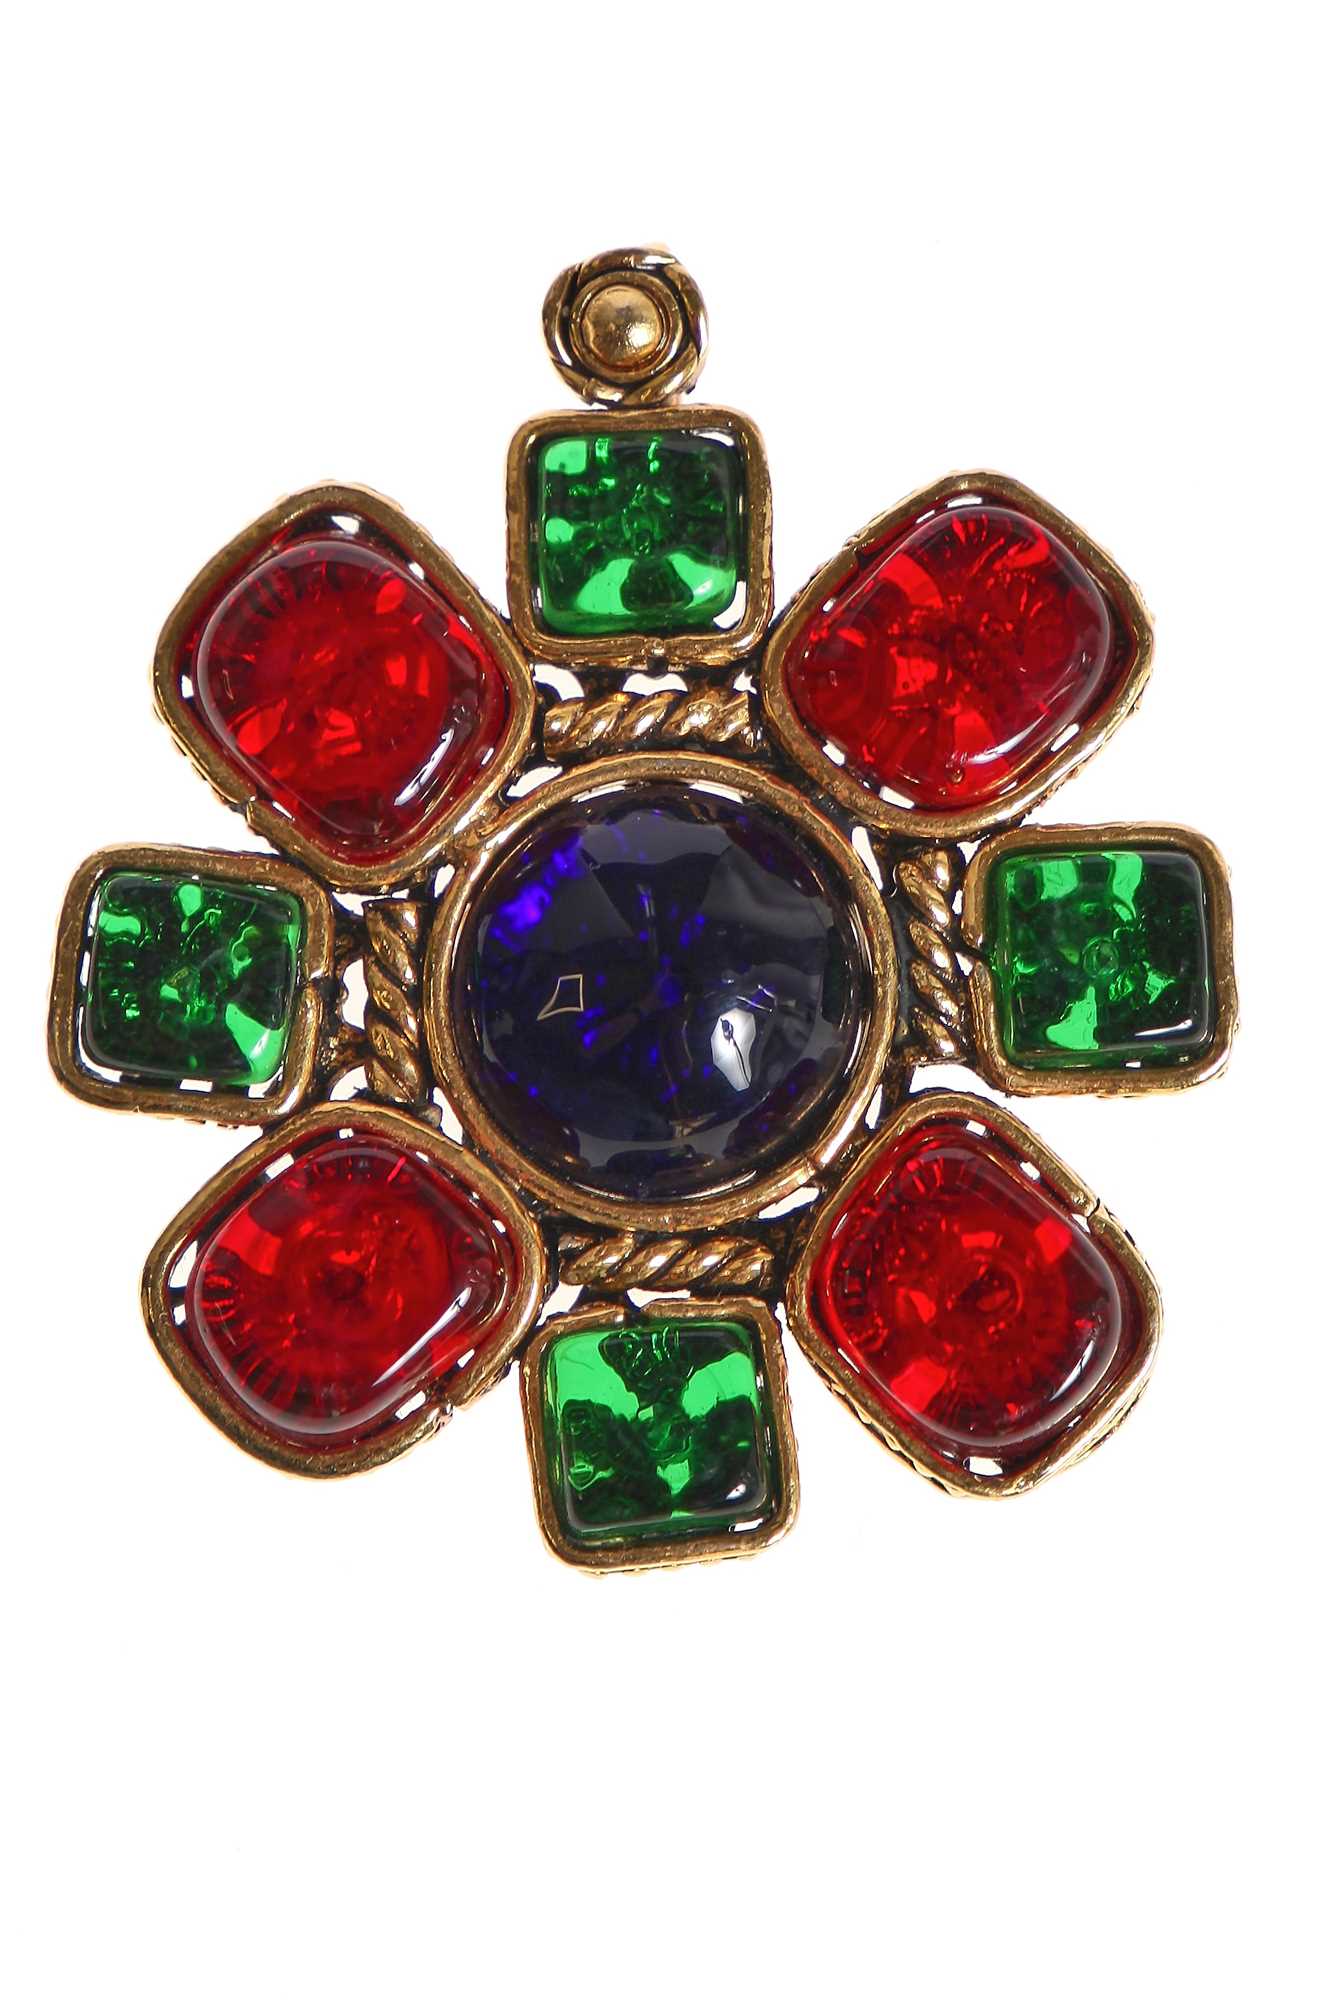 Lot 3 - A Chanel by Gripoix brooch/pendant, 1987